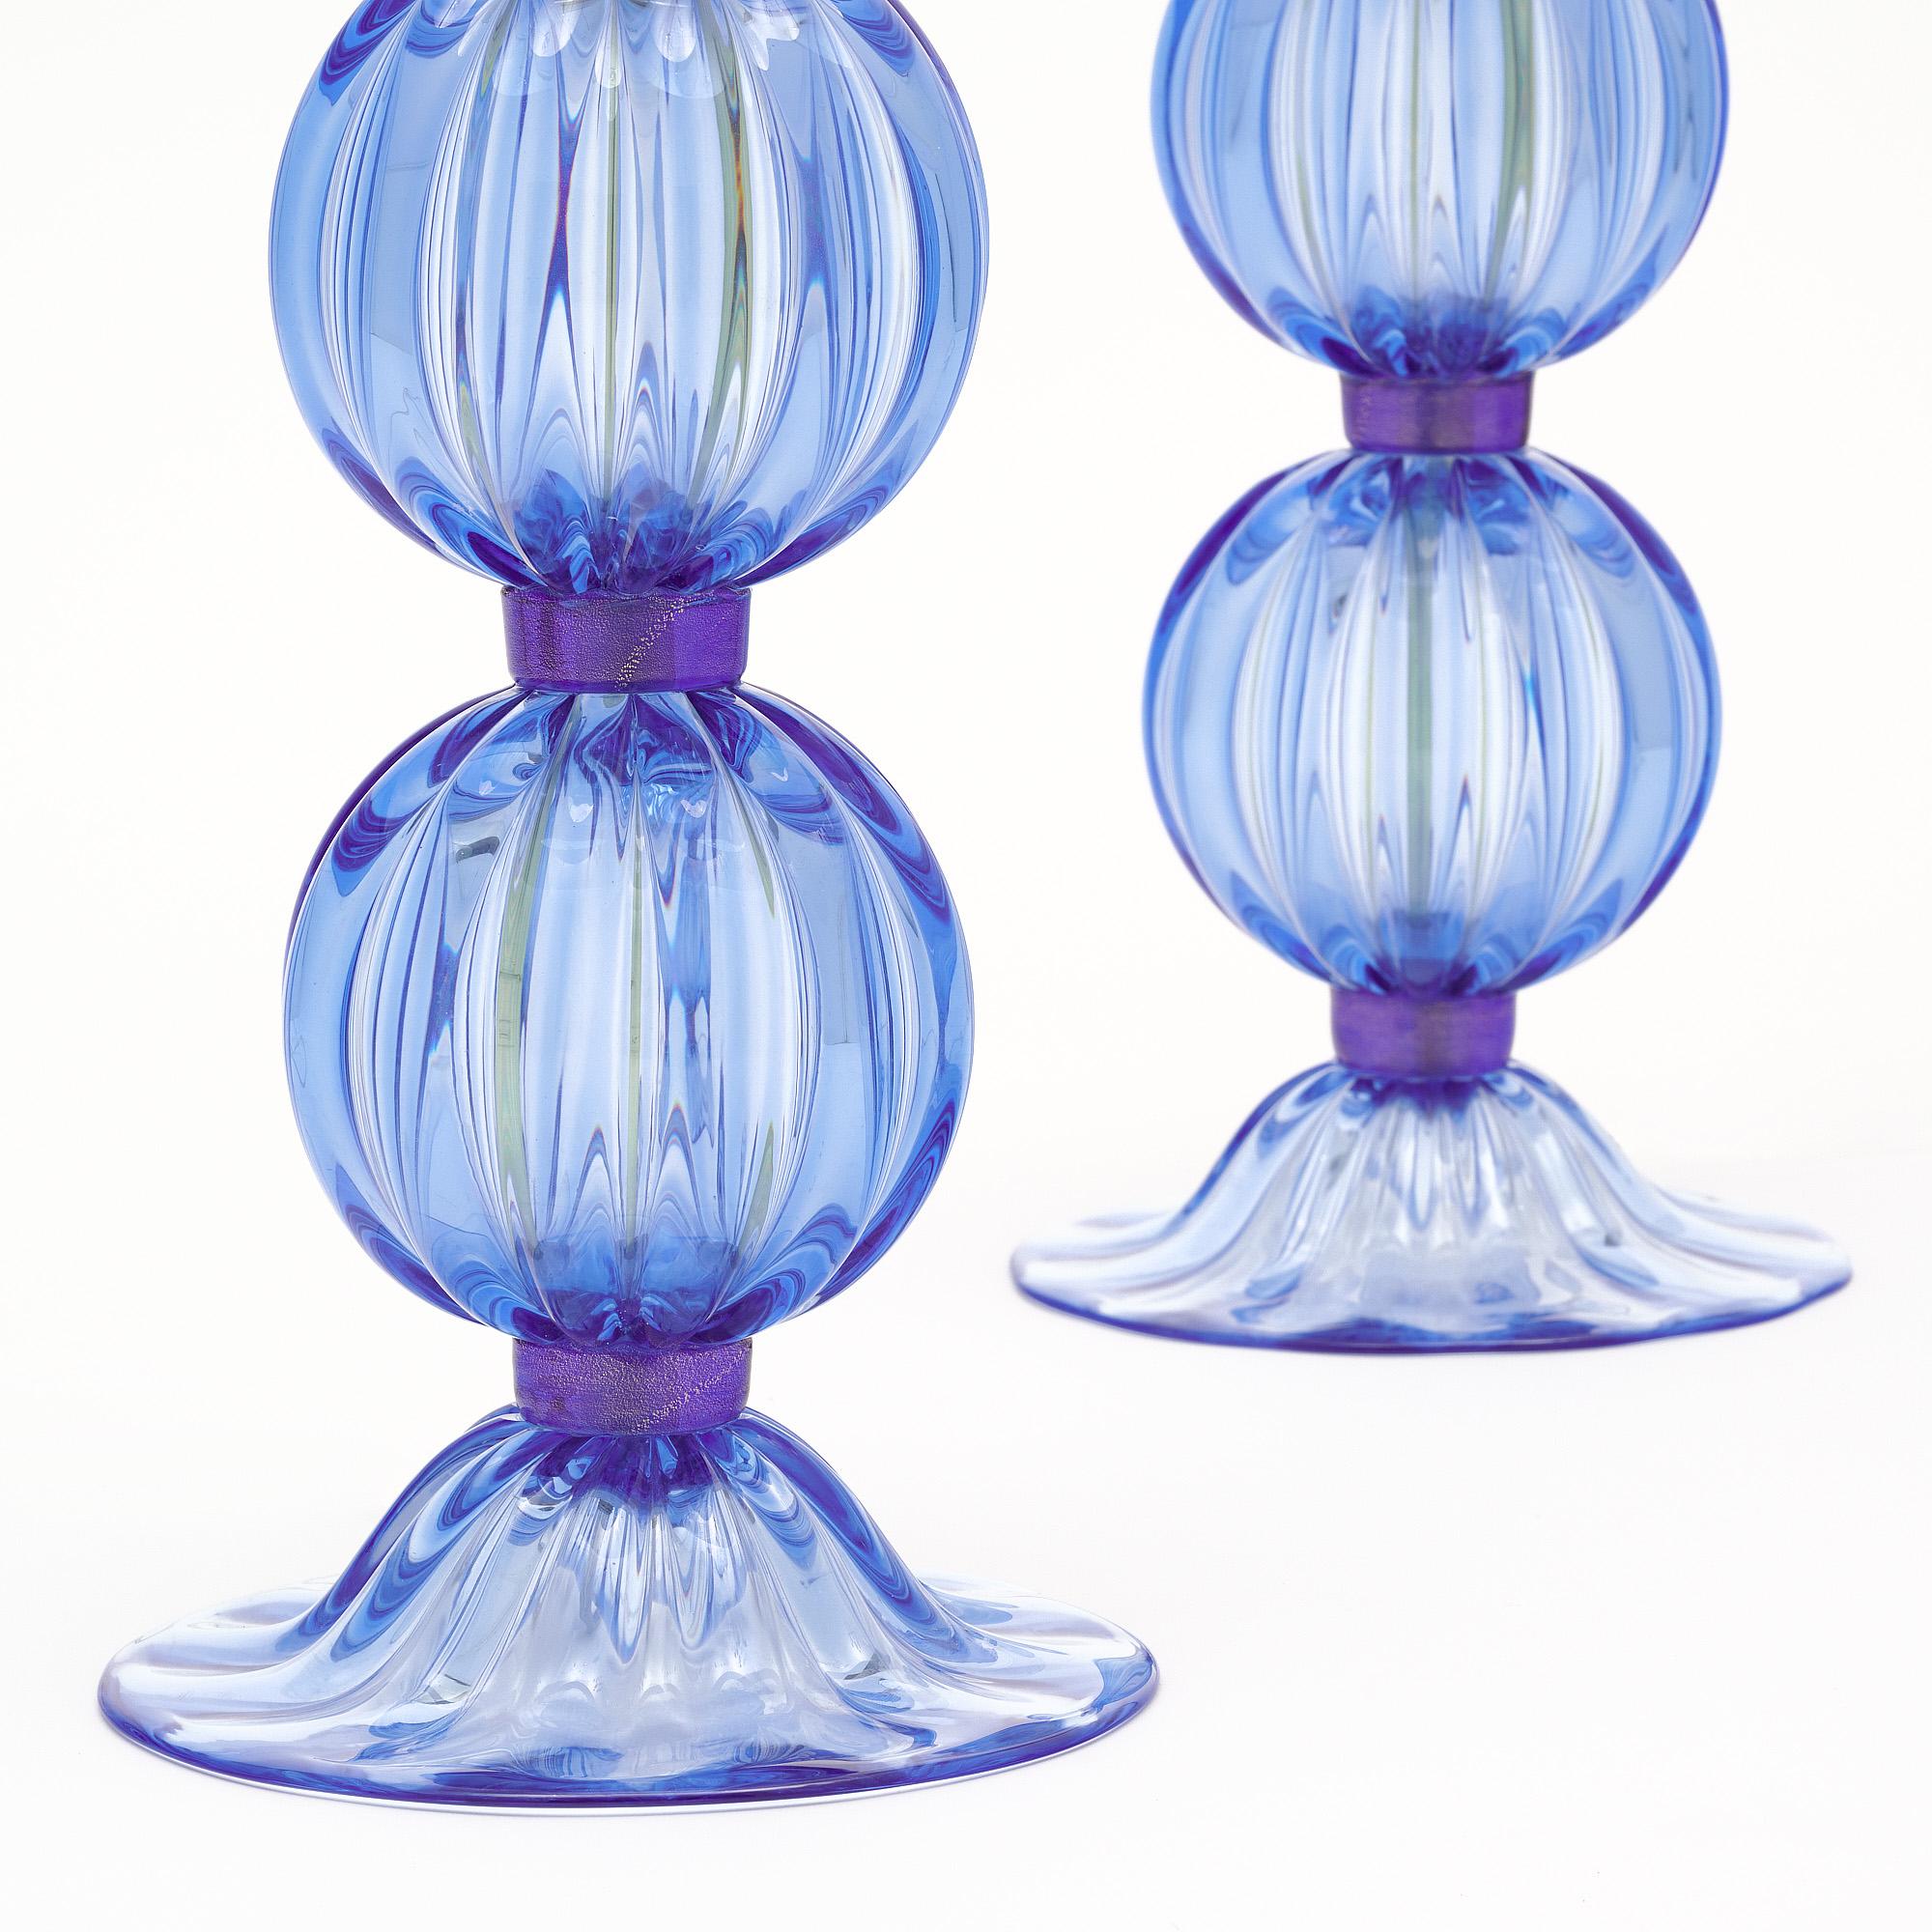 Pair of lamps made of hand-blown glass from the island of Murano outside of Venice, Italy. The lamps feature two blown ridged glass spheres in a striking blue tone. The glass is held together with purple glass rings. They have been newly wired to